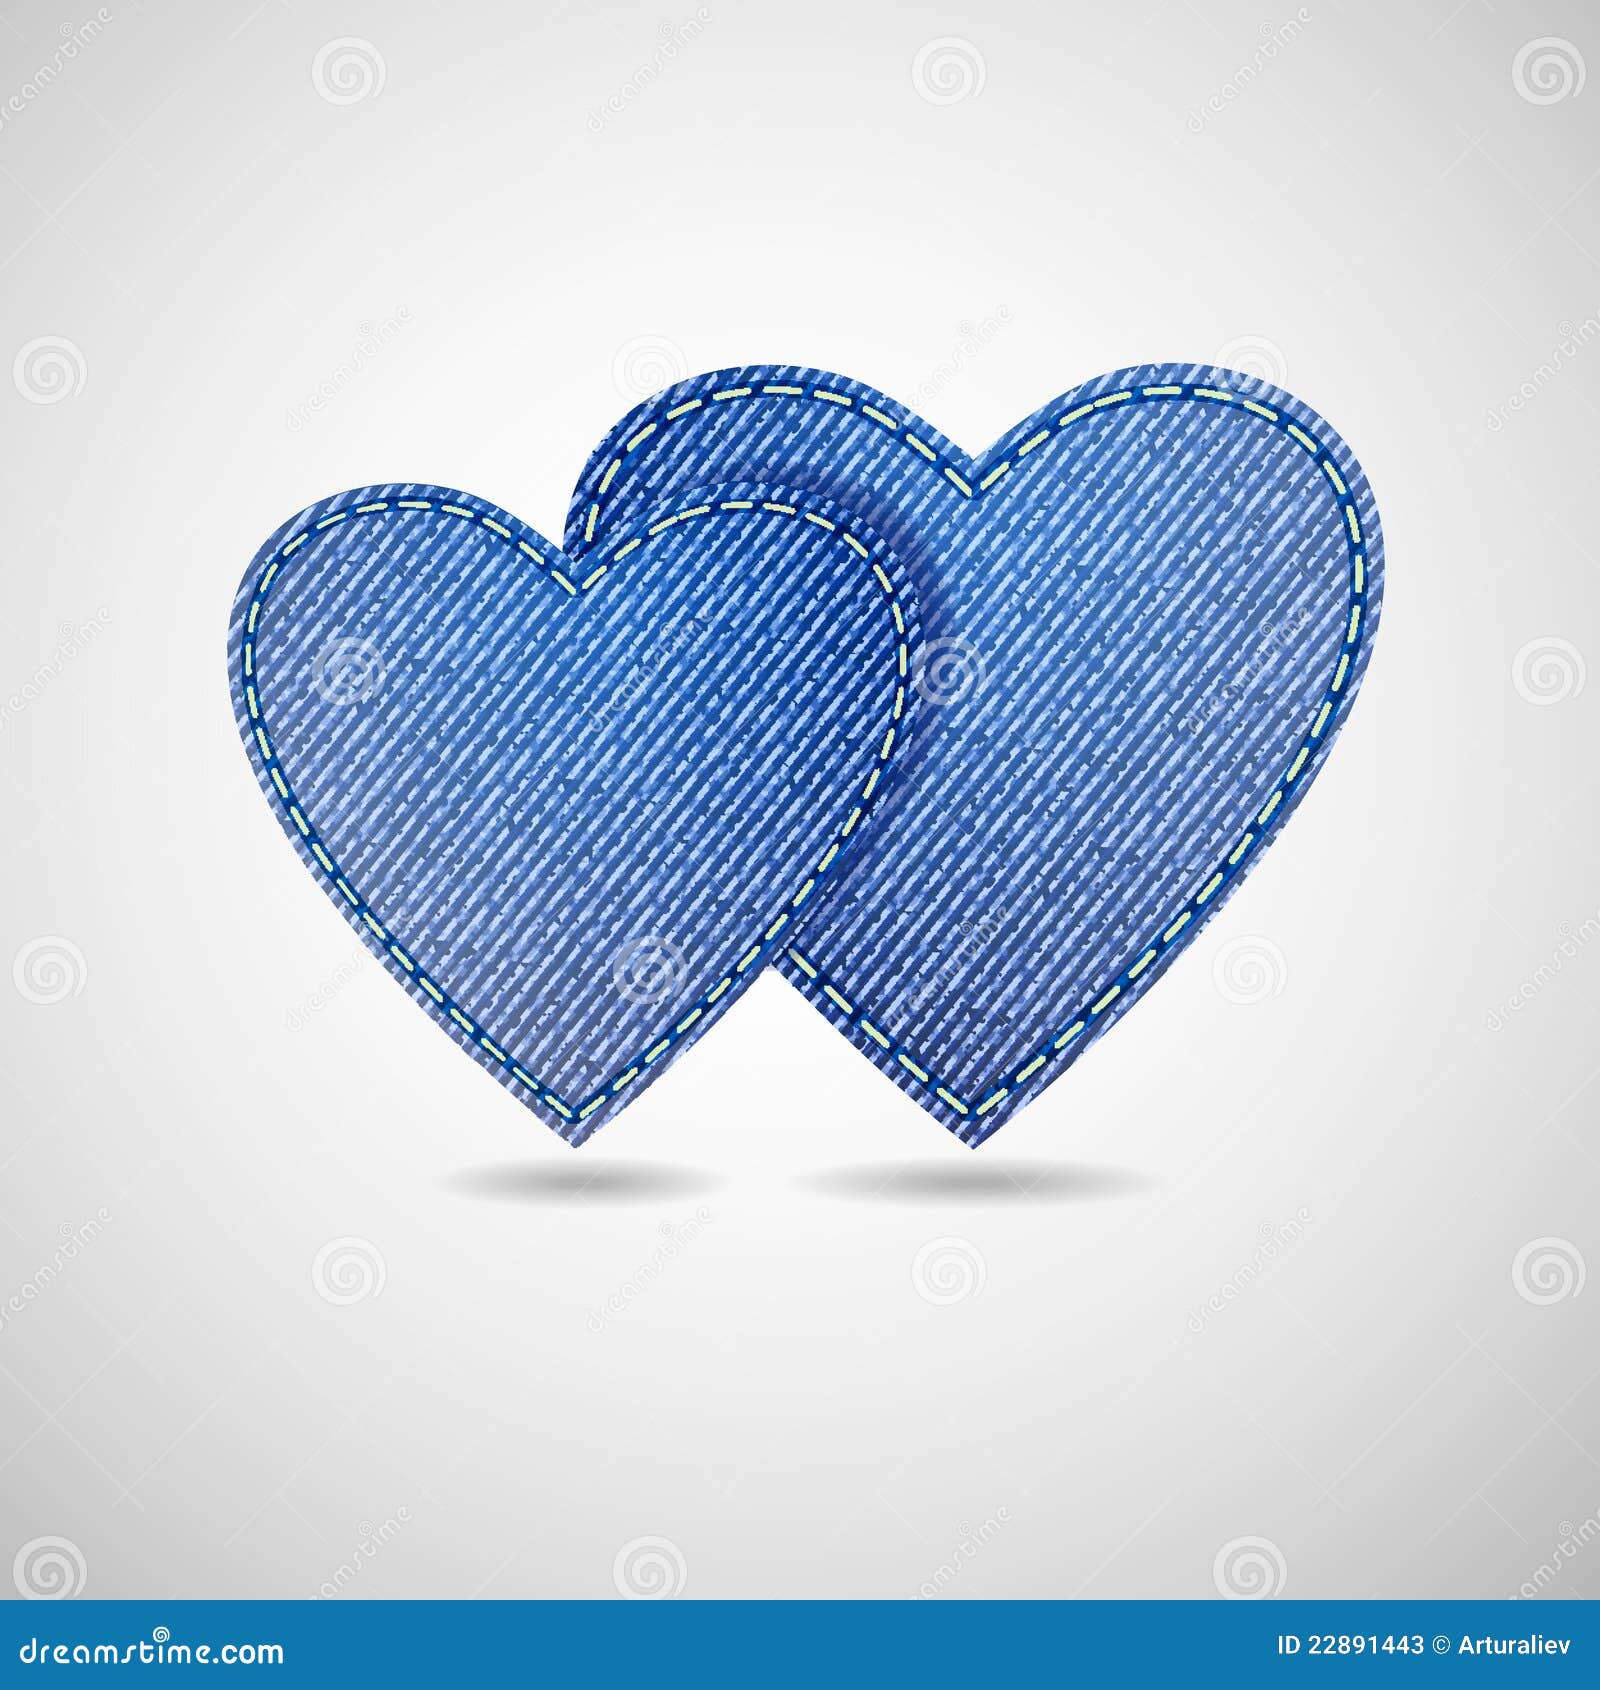 Heart Of Many Different Blue Buttons Stock Photo - Download Image